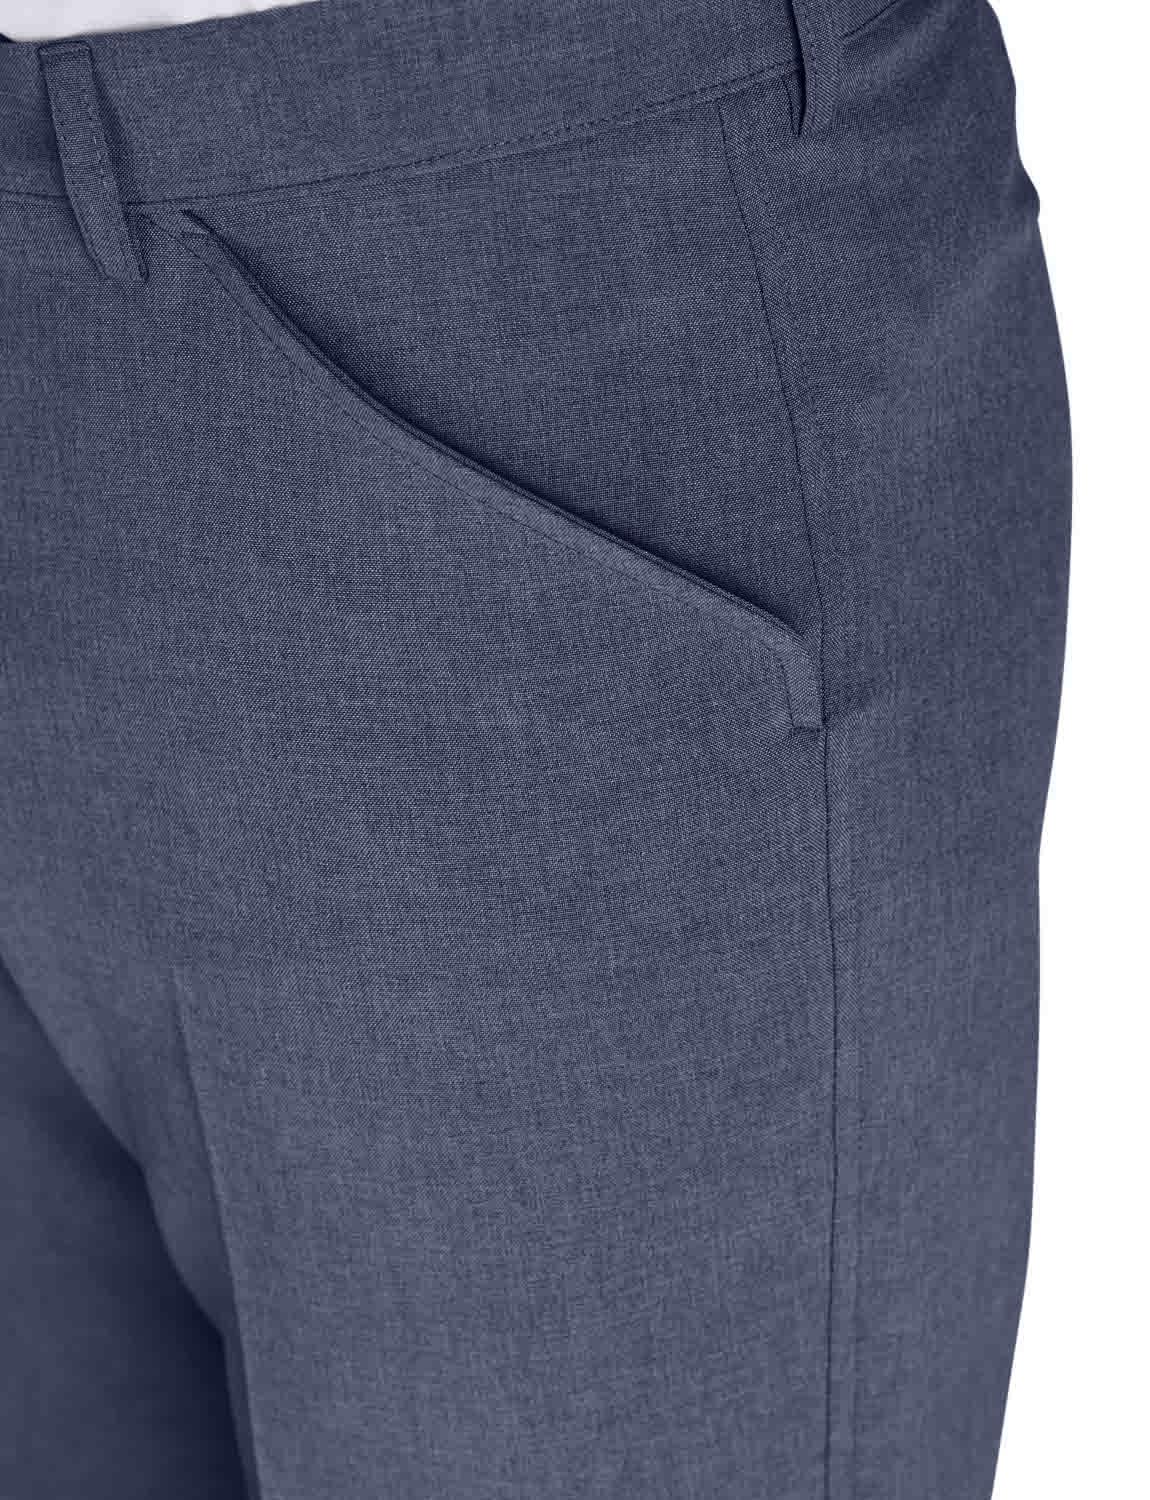 New Farah Mens Assorted Formal Trousers Office Casual Smart Business Work  Pant | eBay